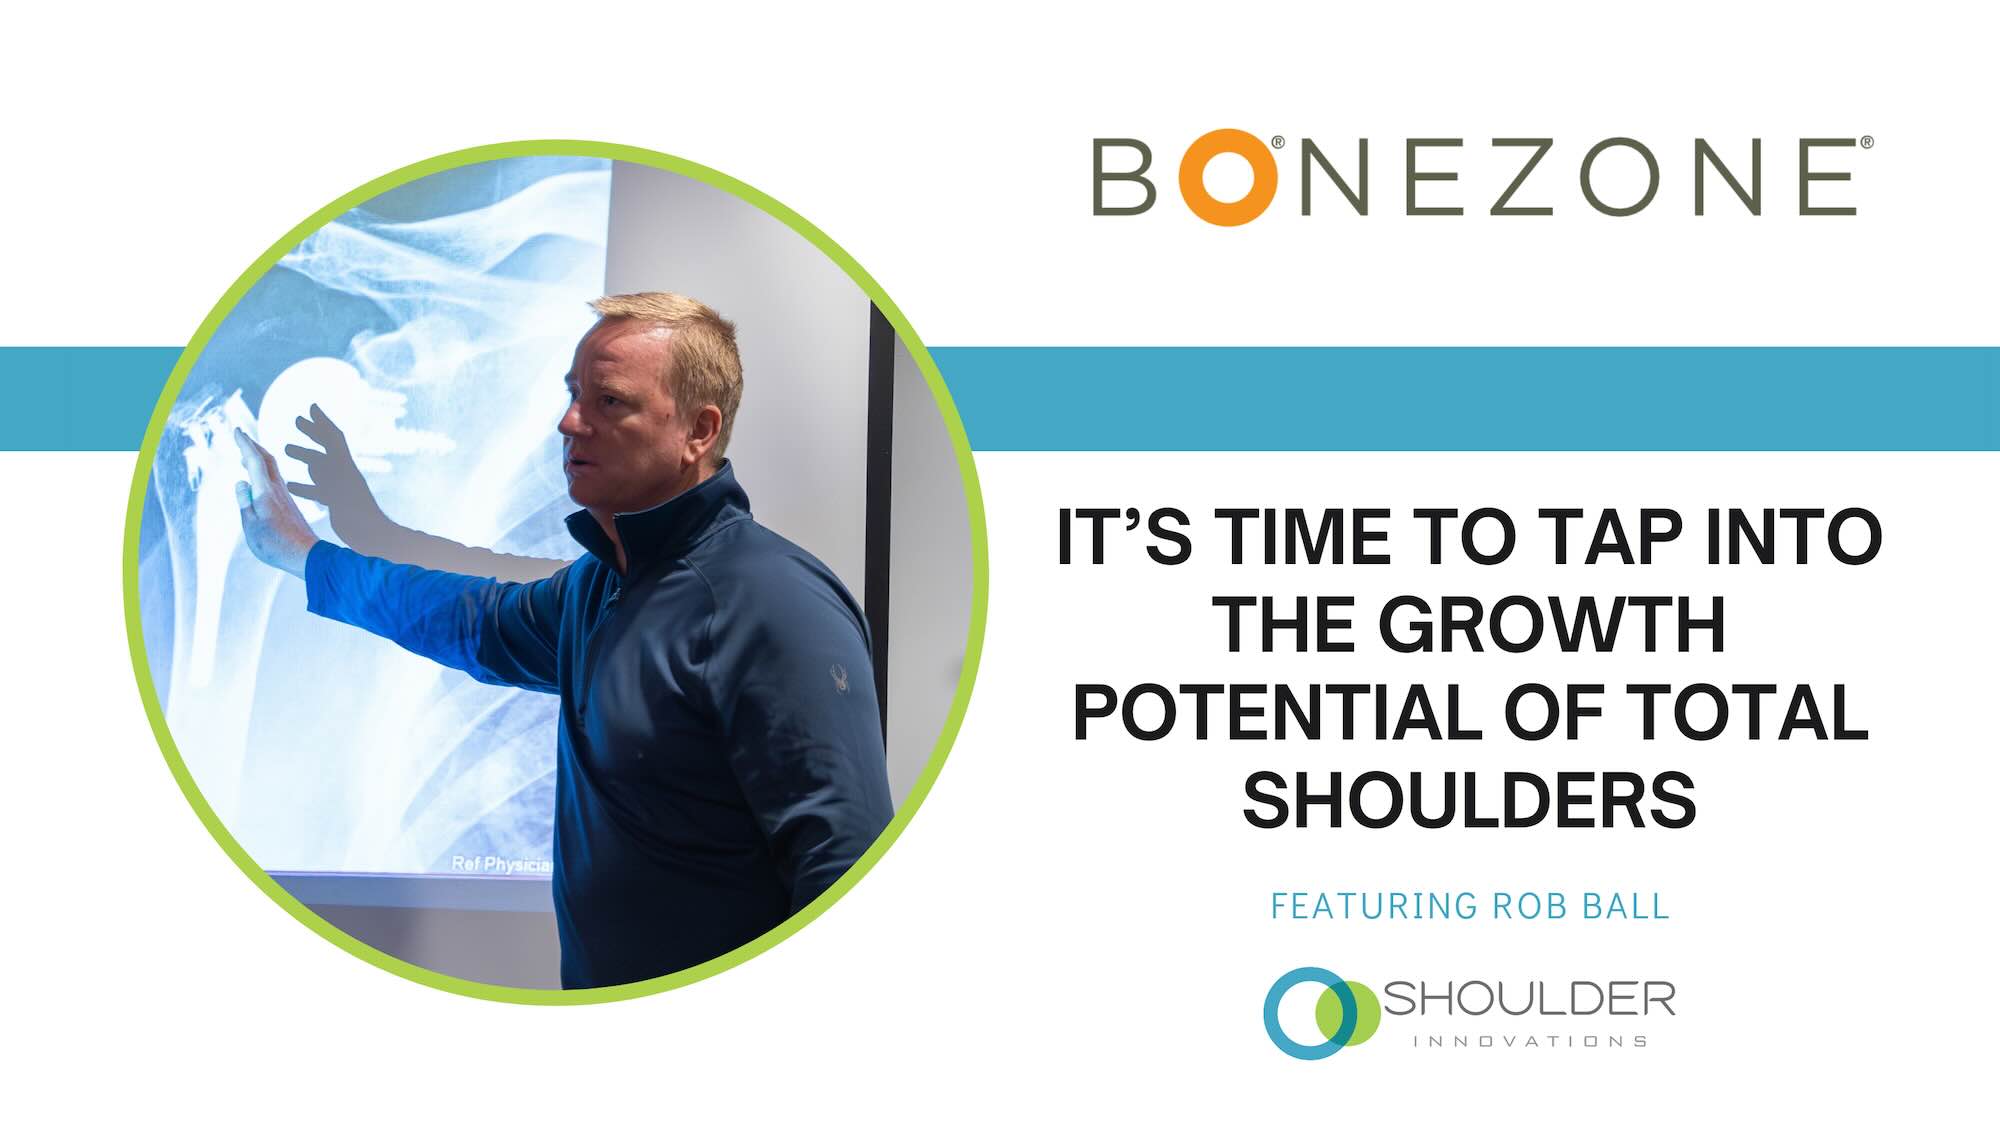 Rob Ball of Shoulder Innovations featured in Bonezone